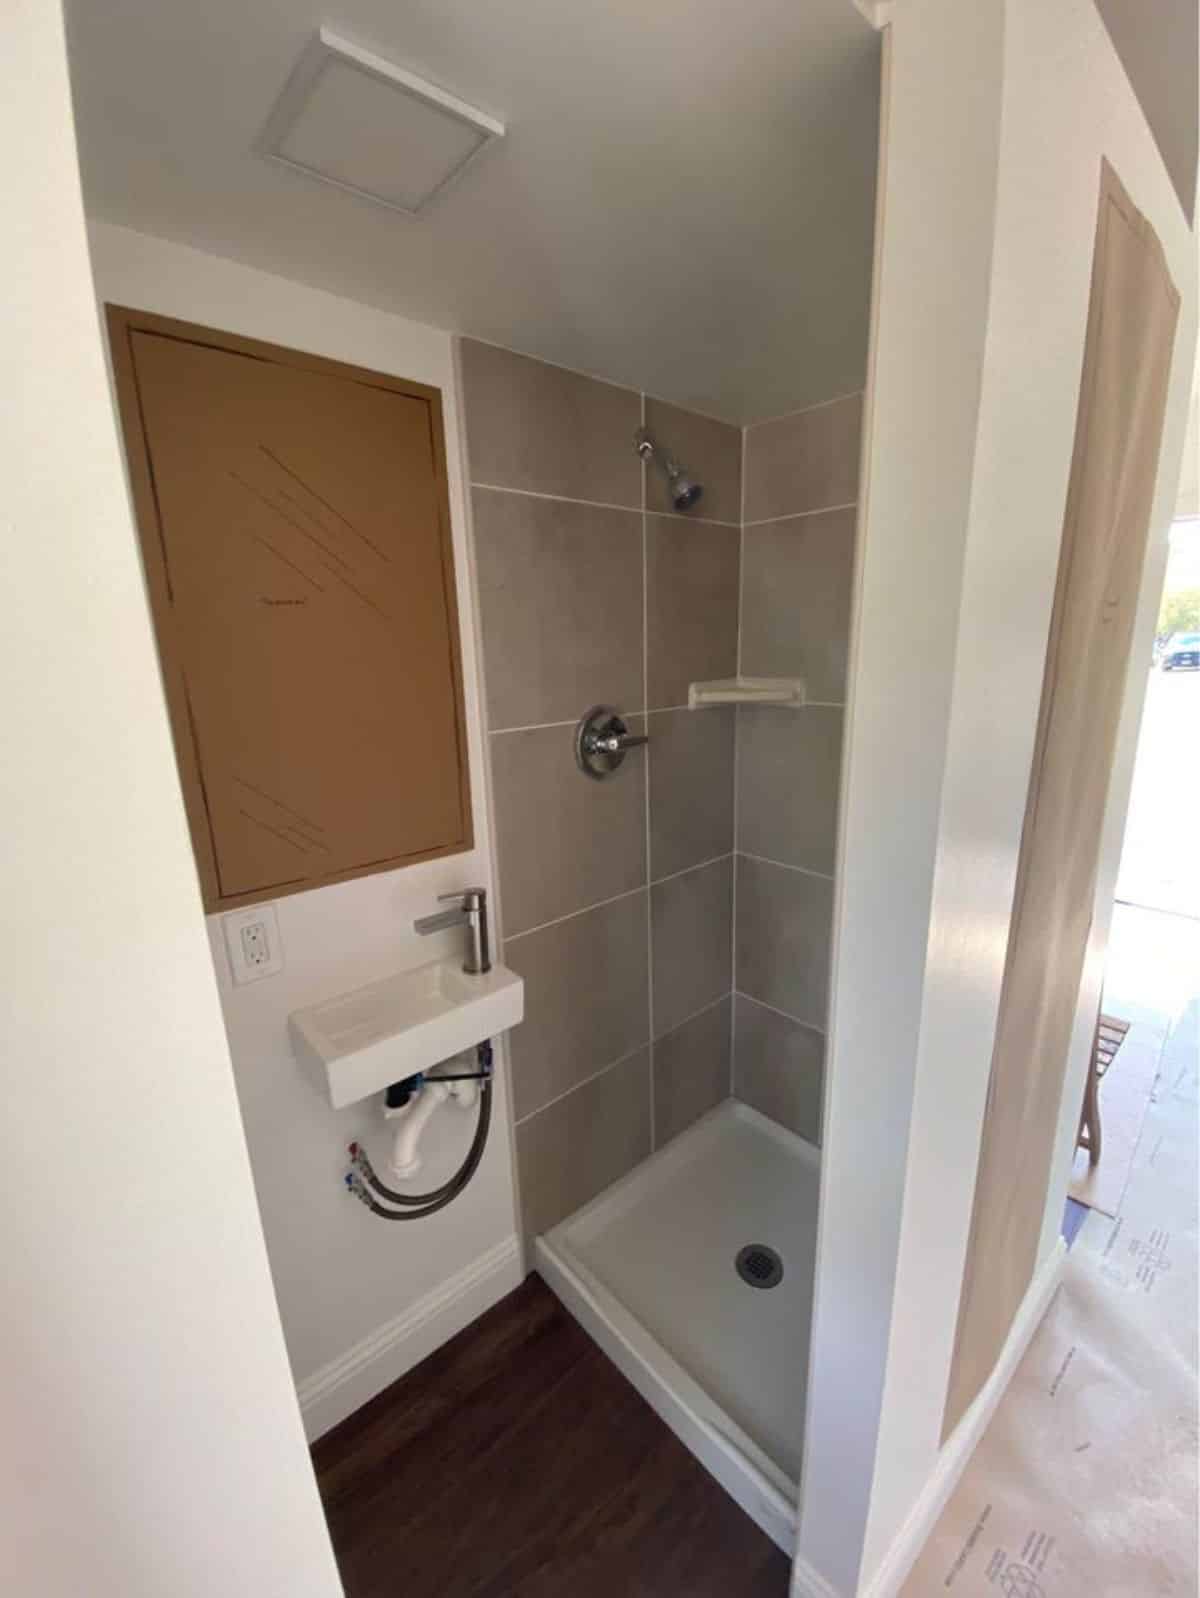 Separate shower area opposite to toilet